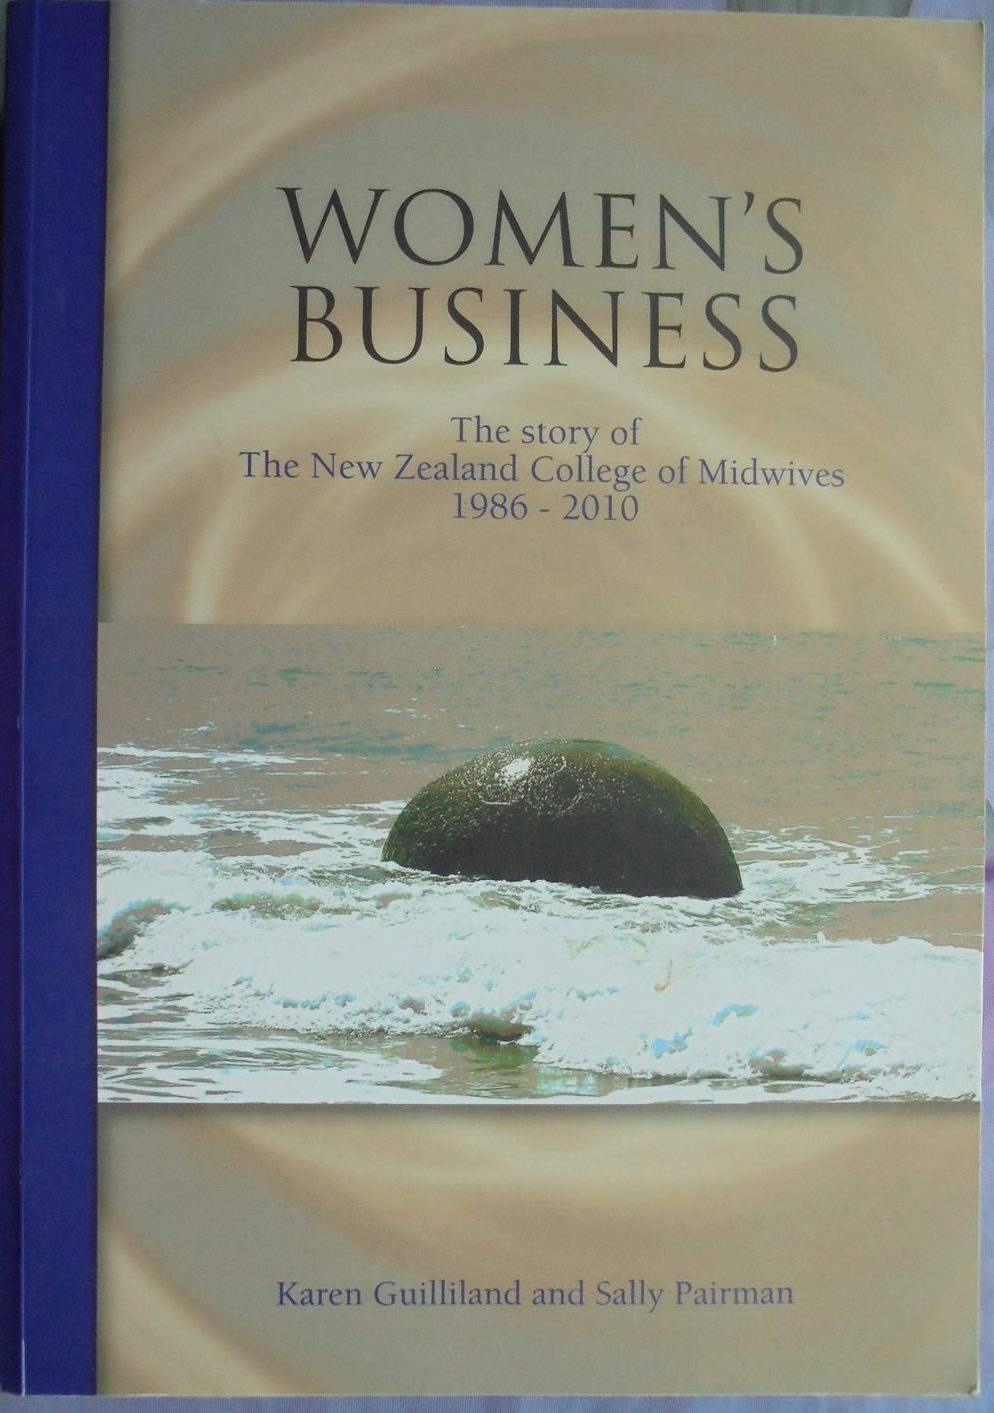 Women's Business The Story of the New Zealand College of Midwives, 1986-2010 by Karen Guilliland and Sally Pairman.